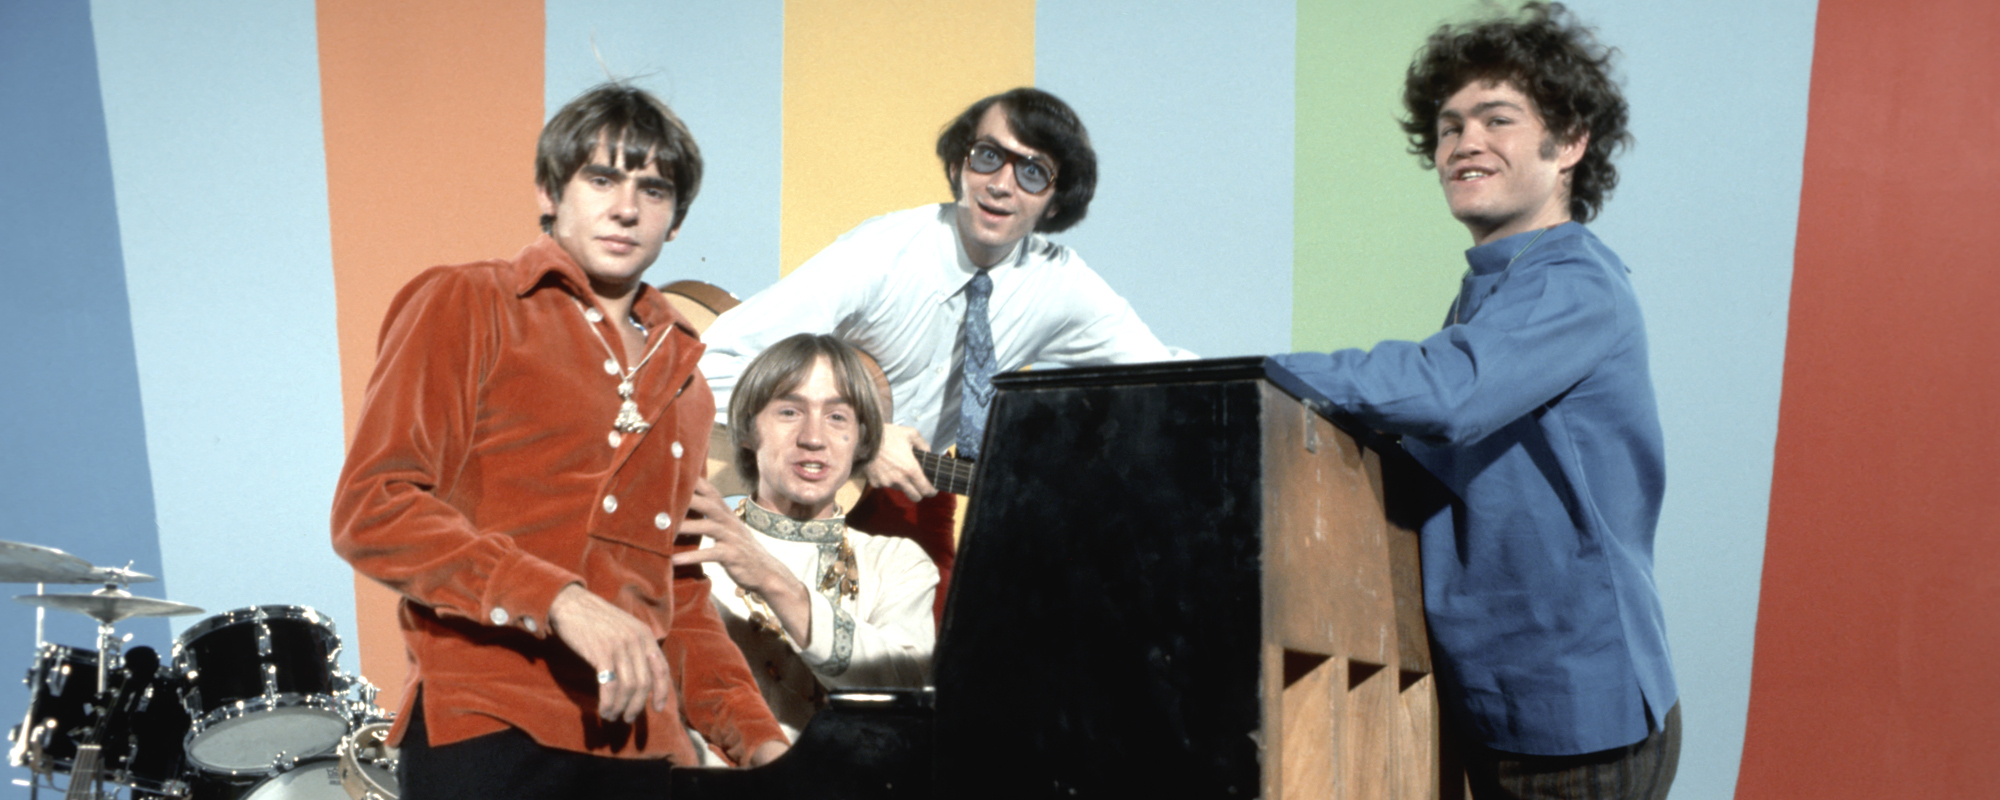 The Story Behind “Pleasant Valley Sunday” by The Monkees and the Distinctive Guitar Riff that’s Based on a Beatles Song